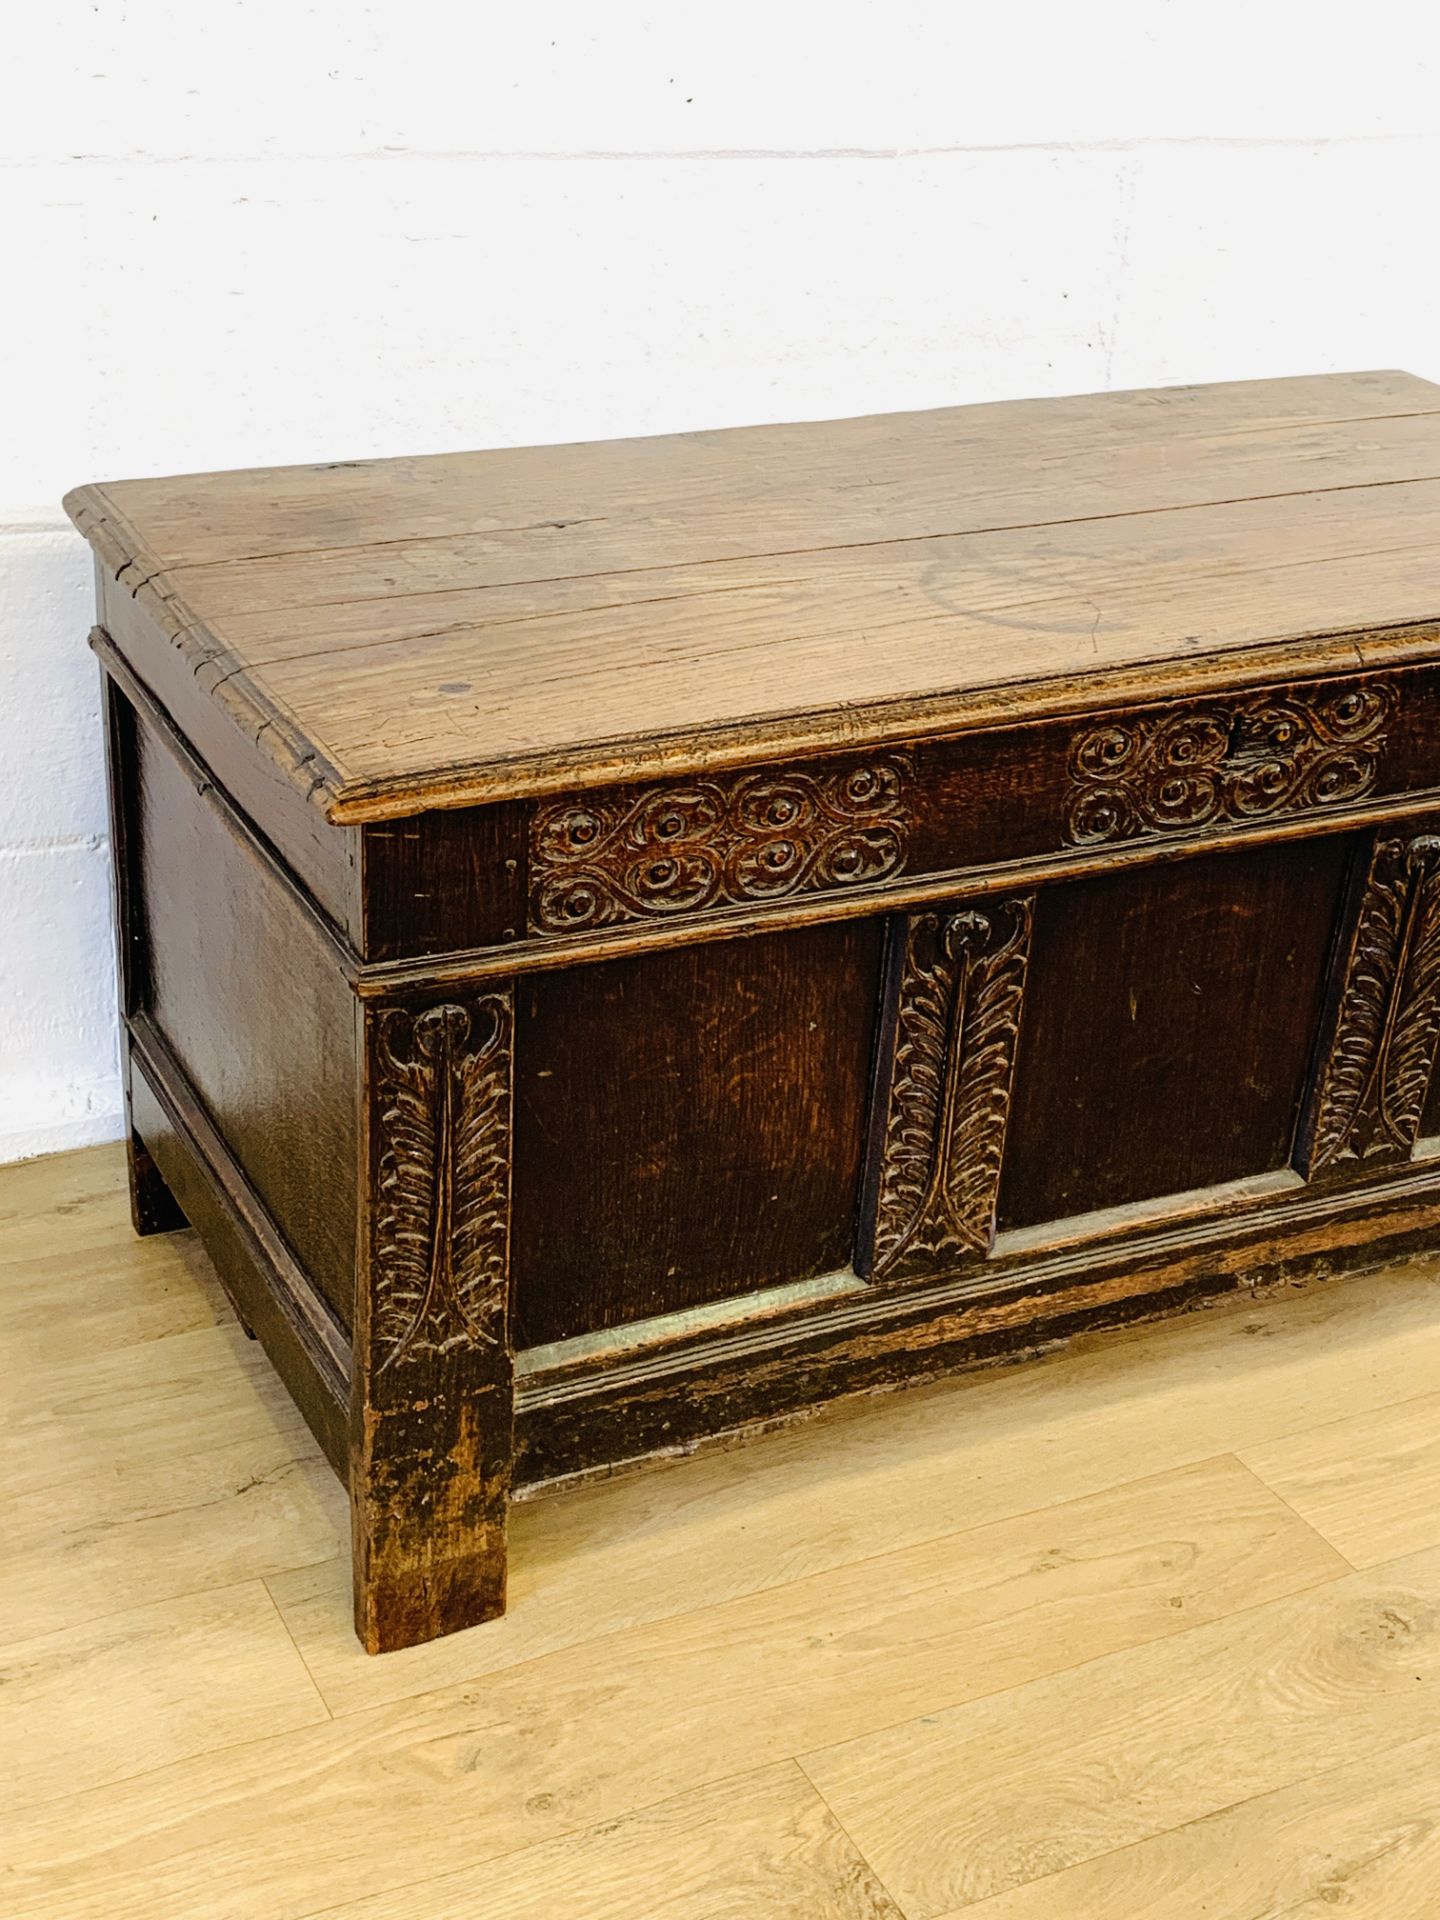 18th century oak chest with carved panel front - Image 3 of 6